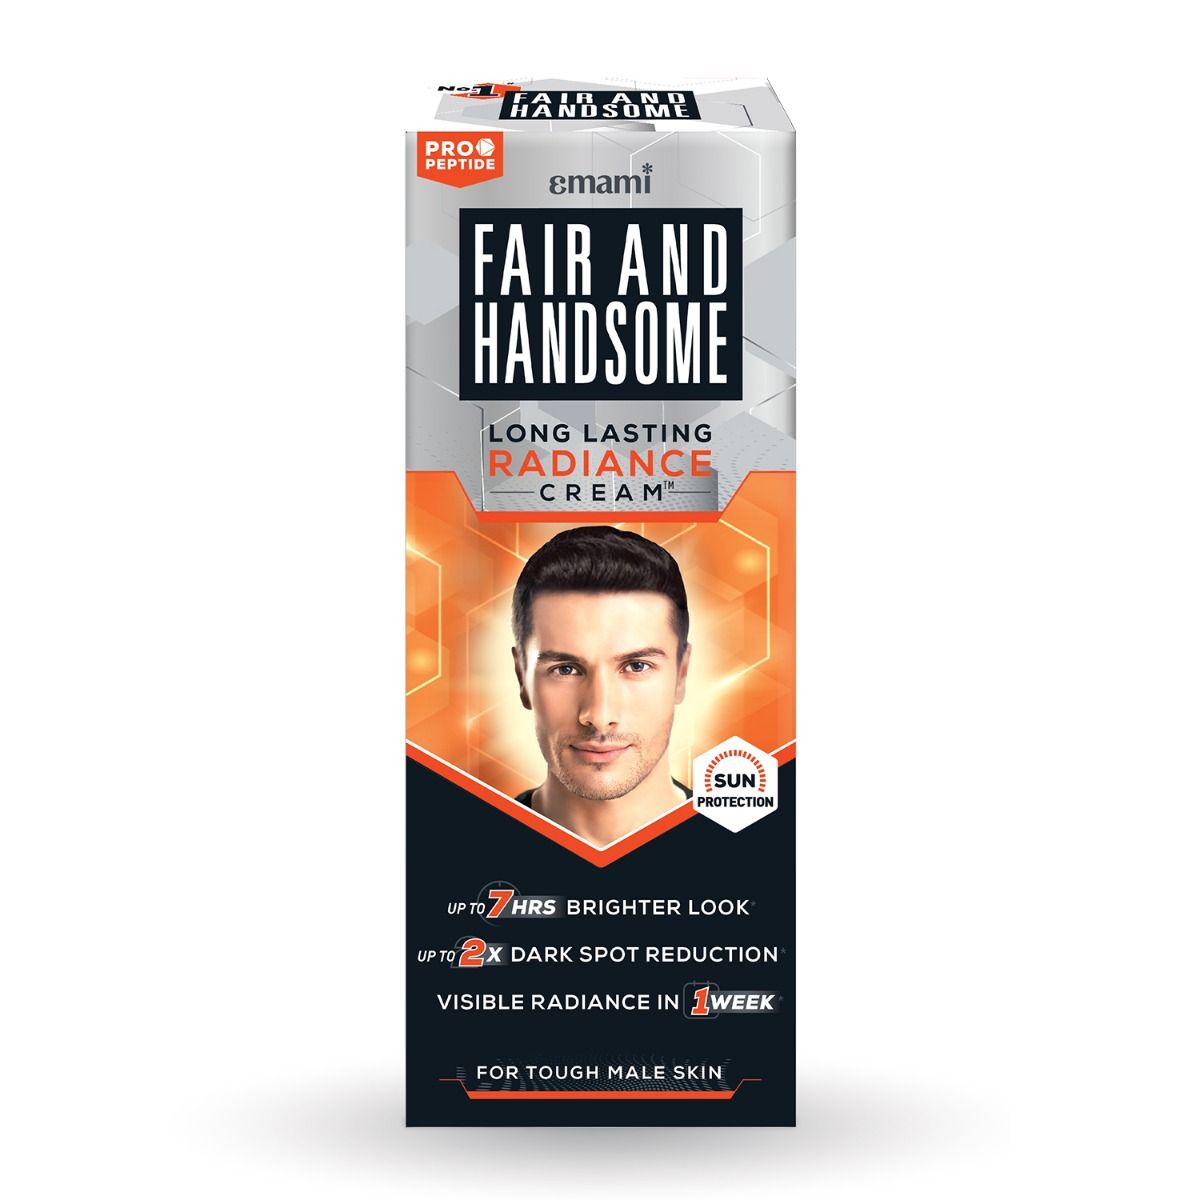 Fair and Handsome Long Lasting Radiance Cream, 60 gm, Pack of 1 